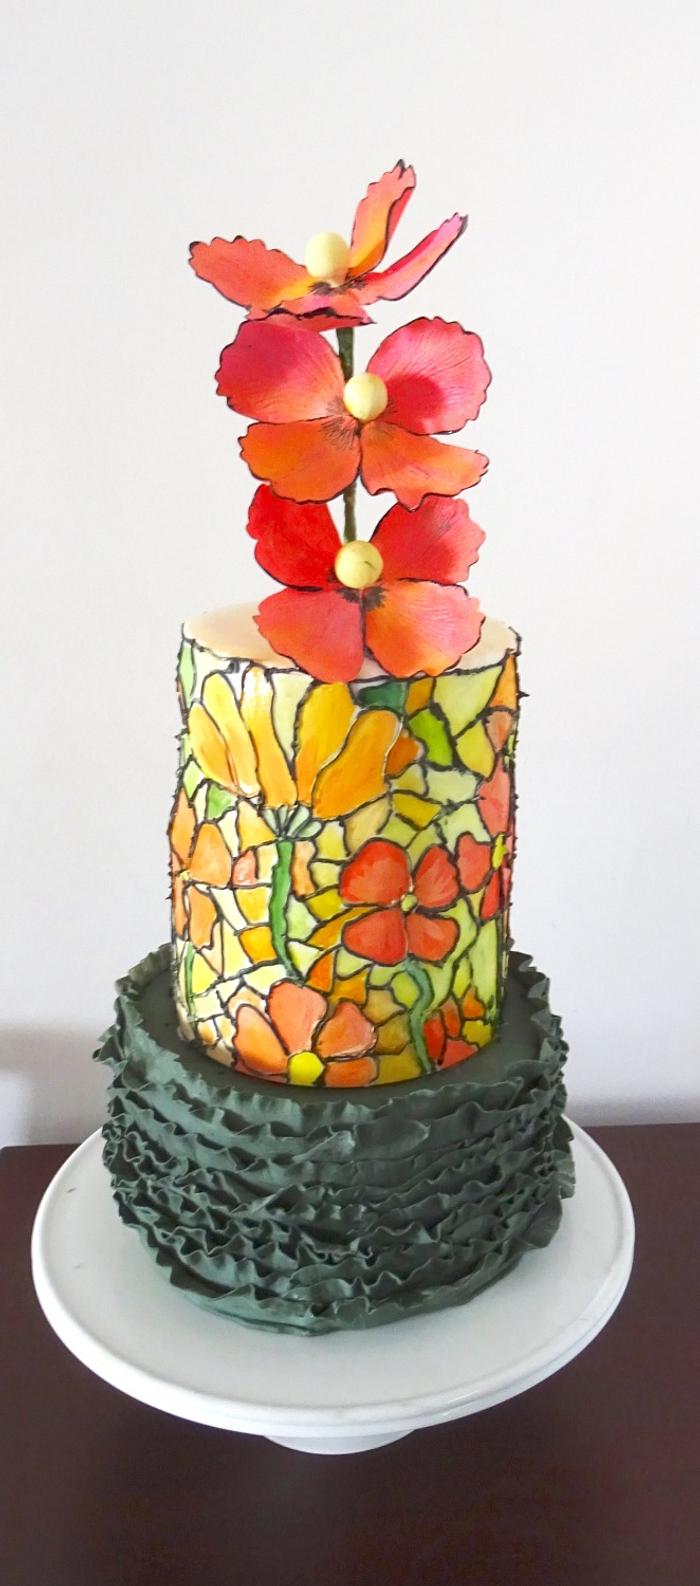 Stained glass cake with poppies